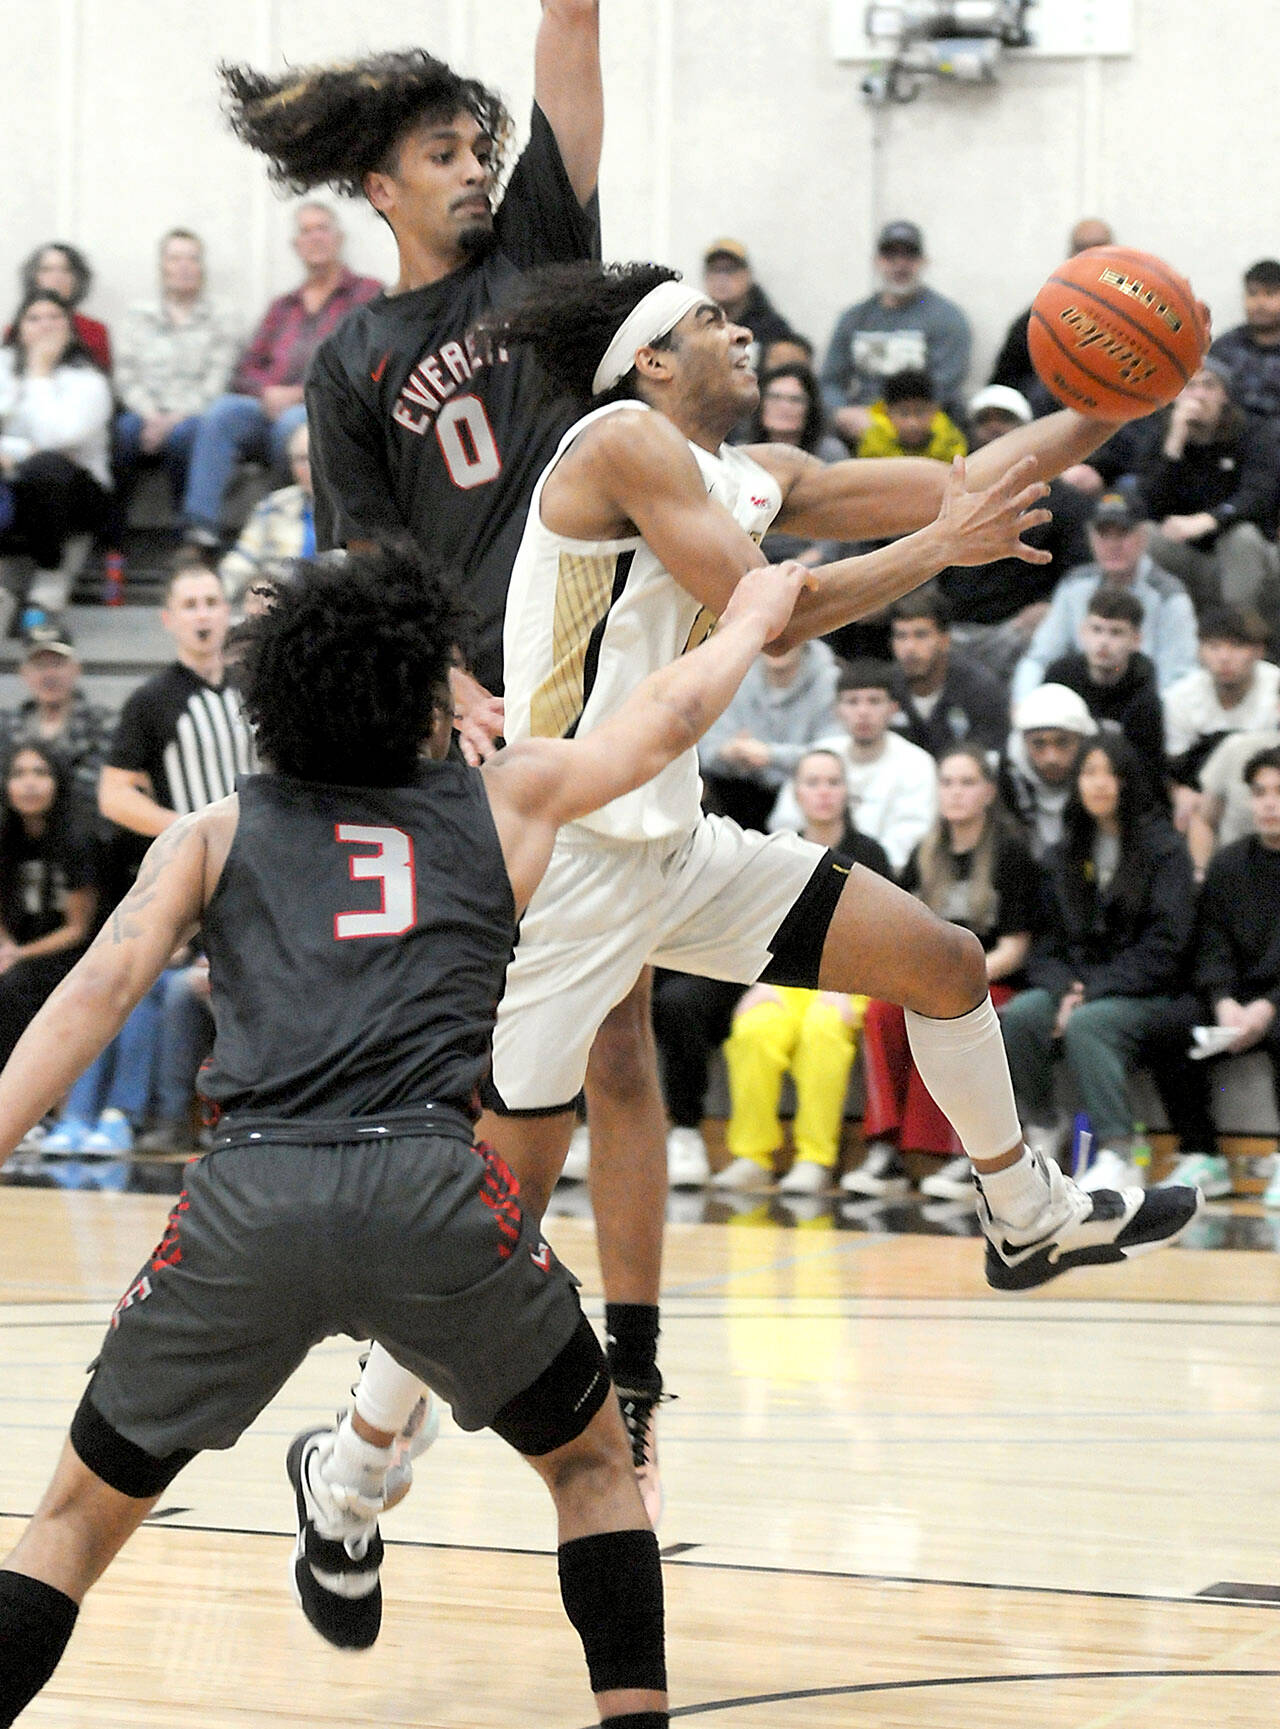 Peninsula’s Roosevelt Williams Jr. looks for the layup as Everett’s Tyriq Luke, front, and Leon Sayers hold the lane on Wednesday’s regular season finale at Peninsula College in Port Angeles. (Keith Thorpe/Peninsula Daily News)